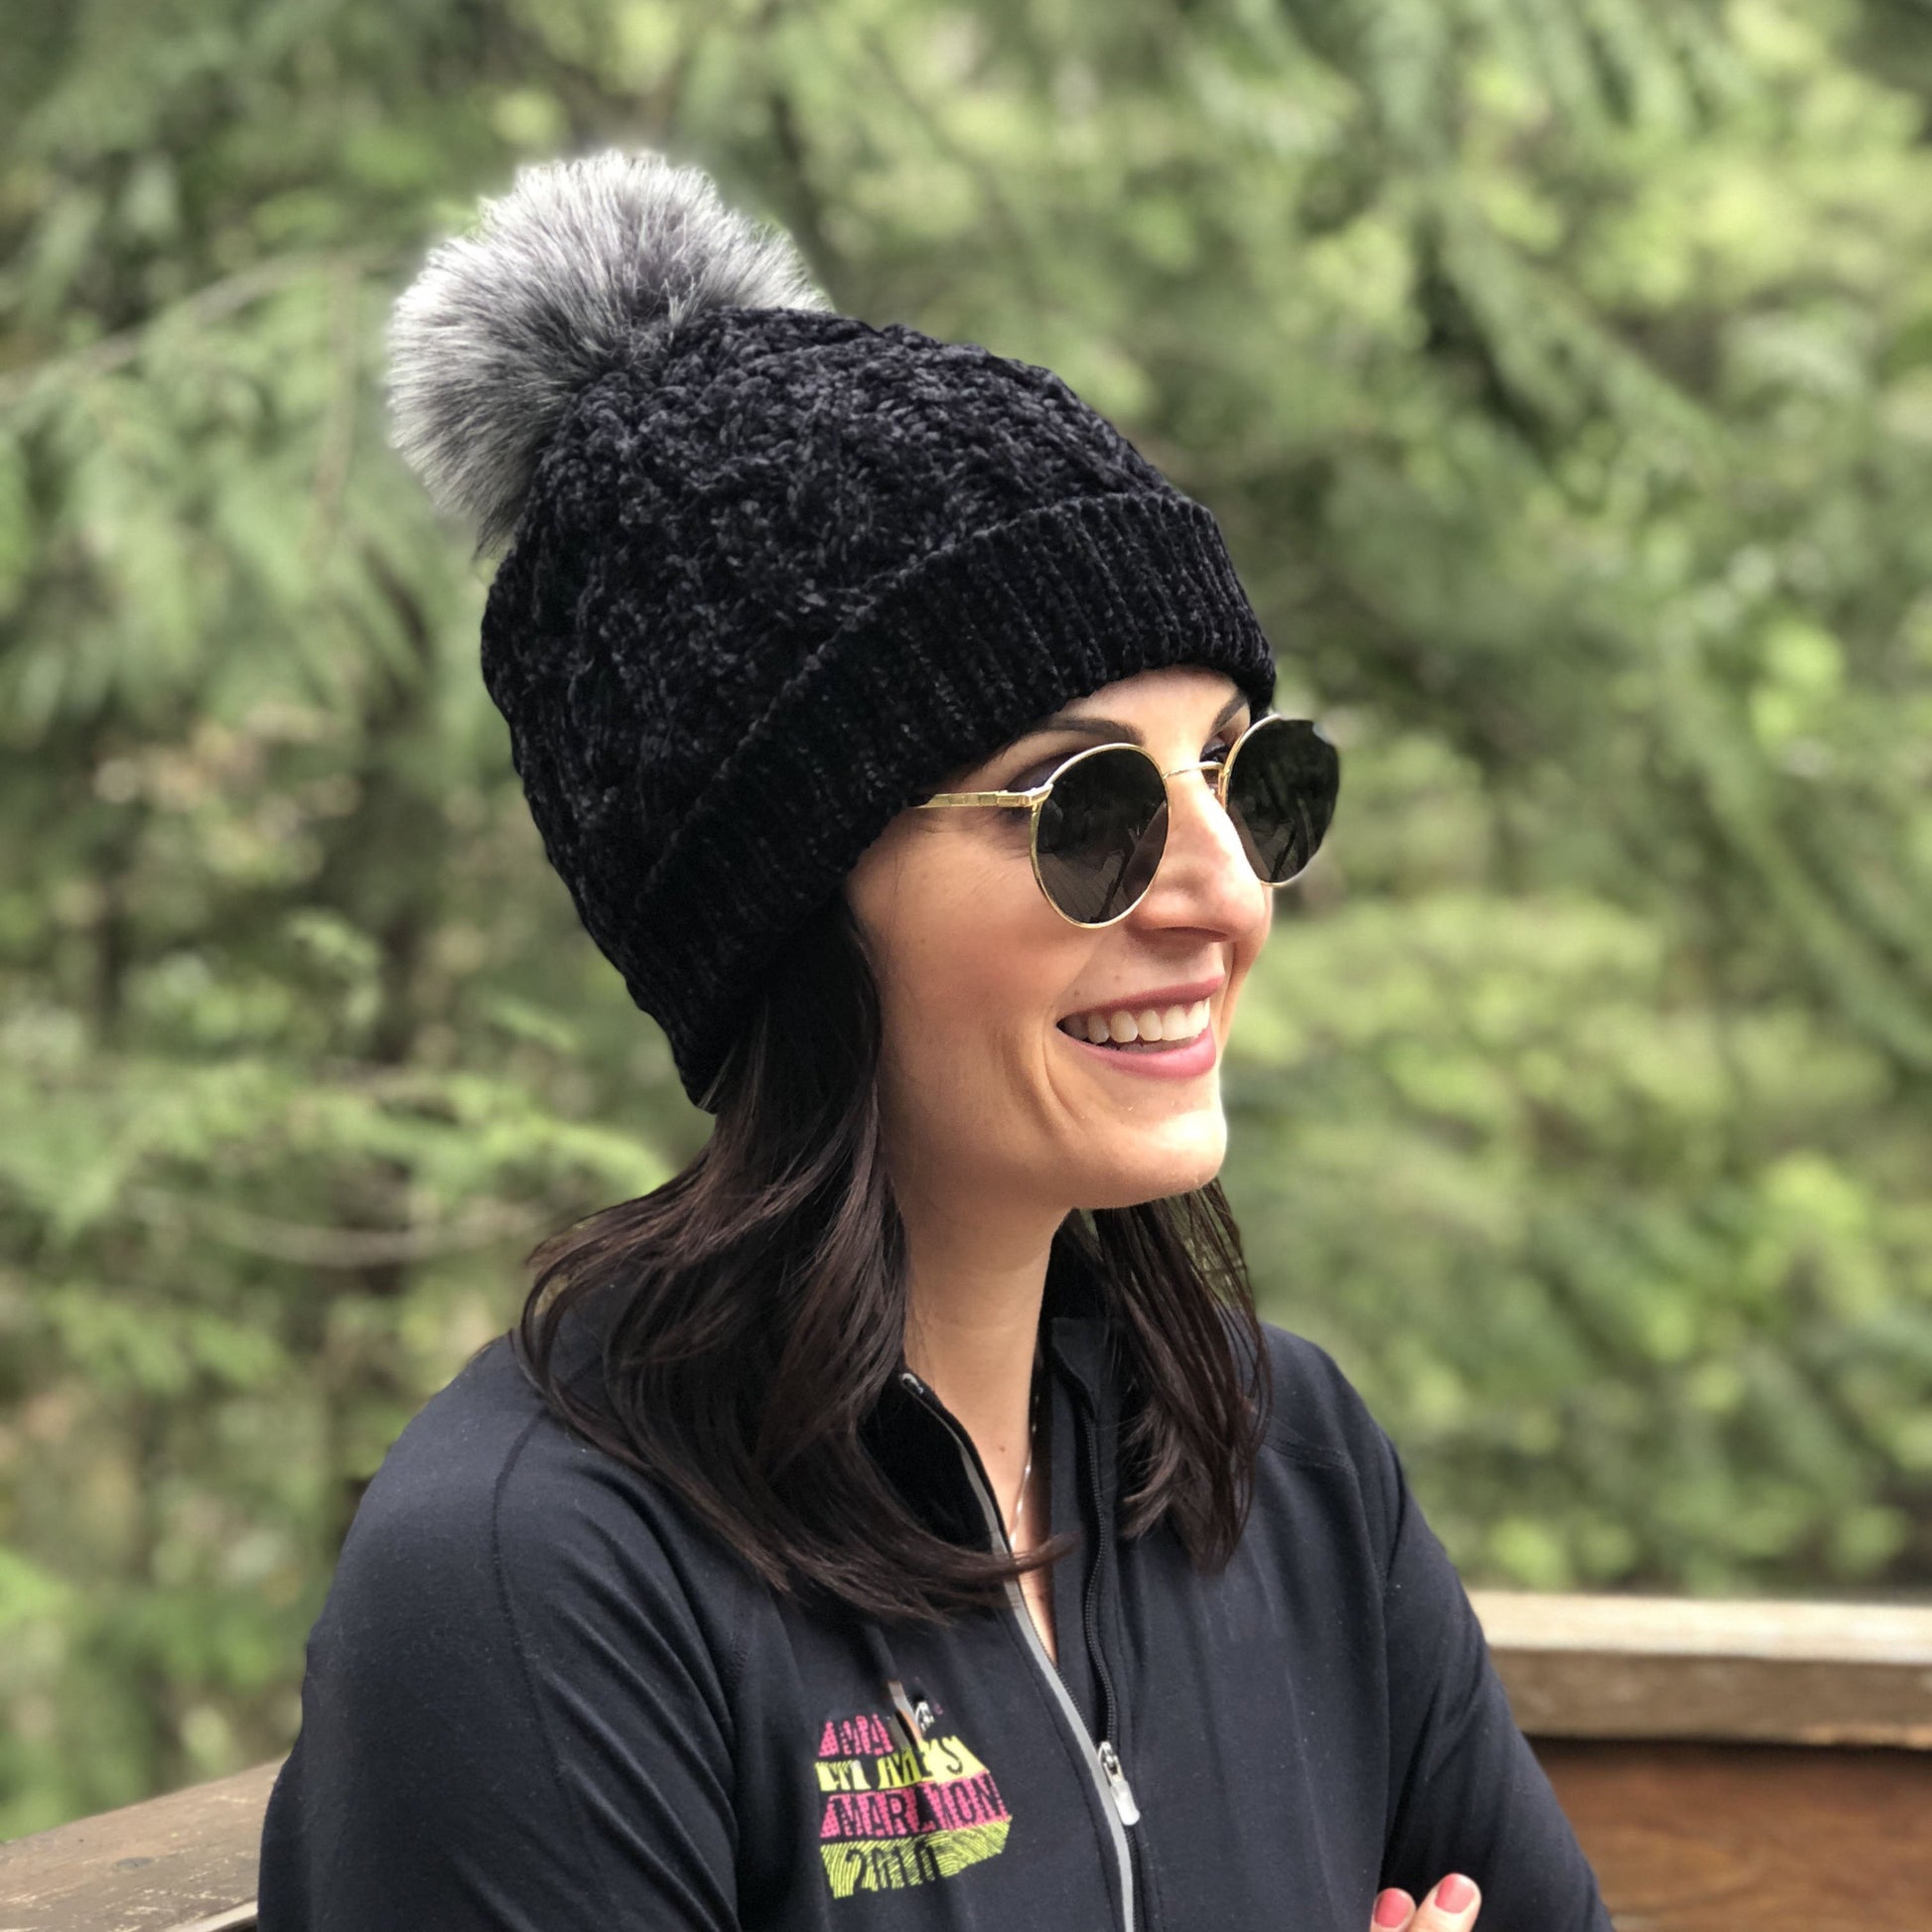 Pudus Winter Cable Knit Chenille Toque in Black with Fuzzy Pom Pom and Faux Fur Sherpa Fleece Lining